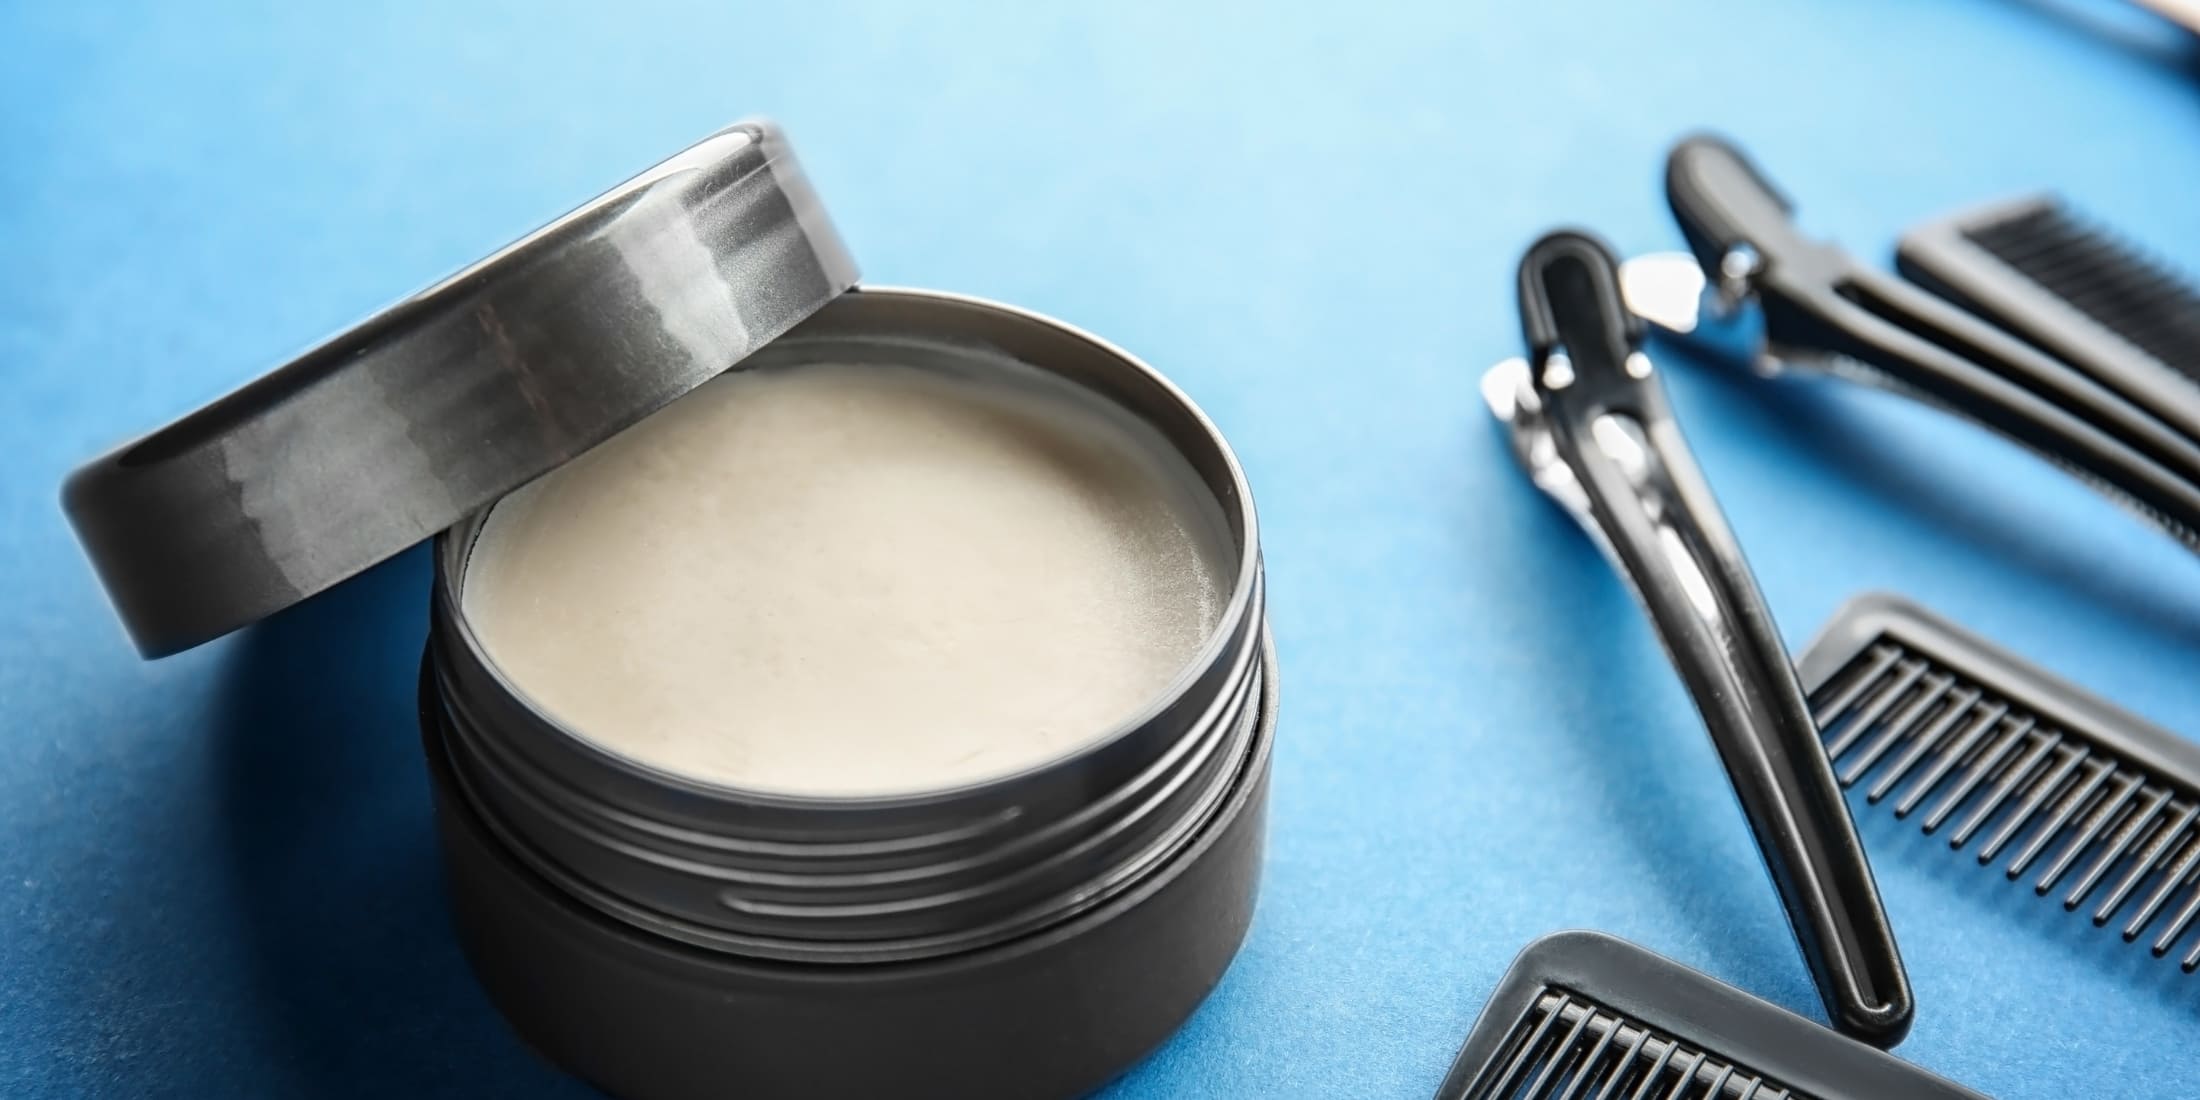 Open container of light-colored hair pomade with various black combs arranged on a vibrant blue background, showcasing essential tools for styling with pomade hairstyles.